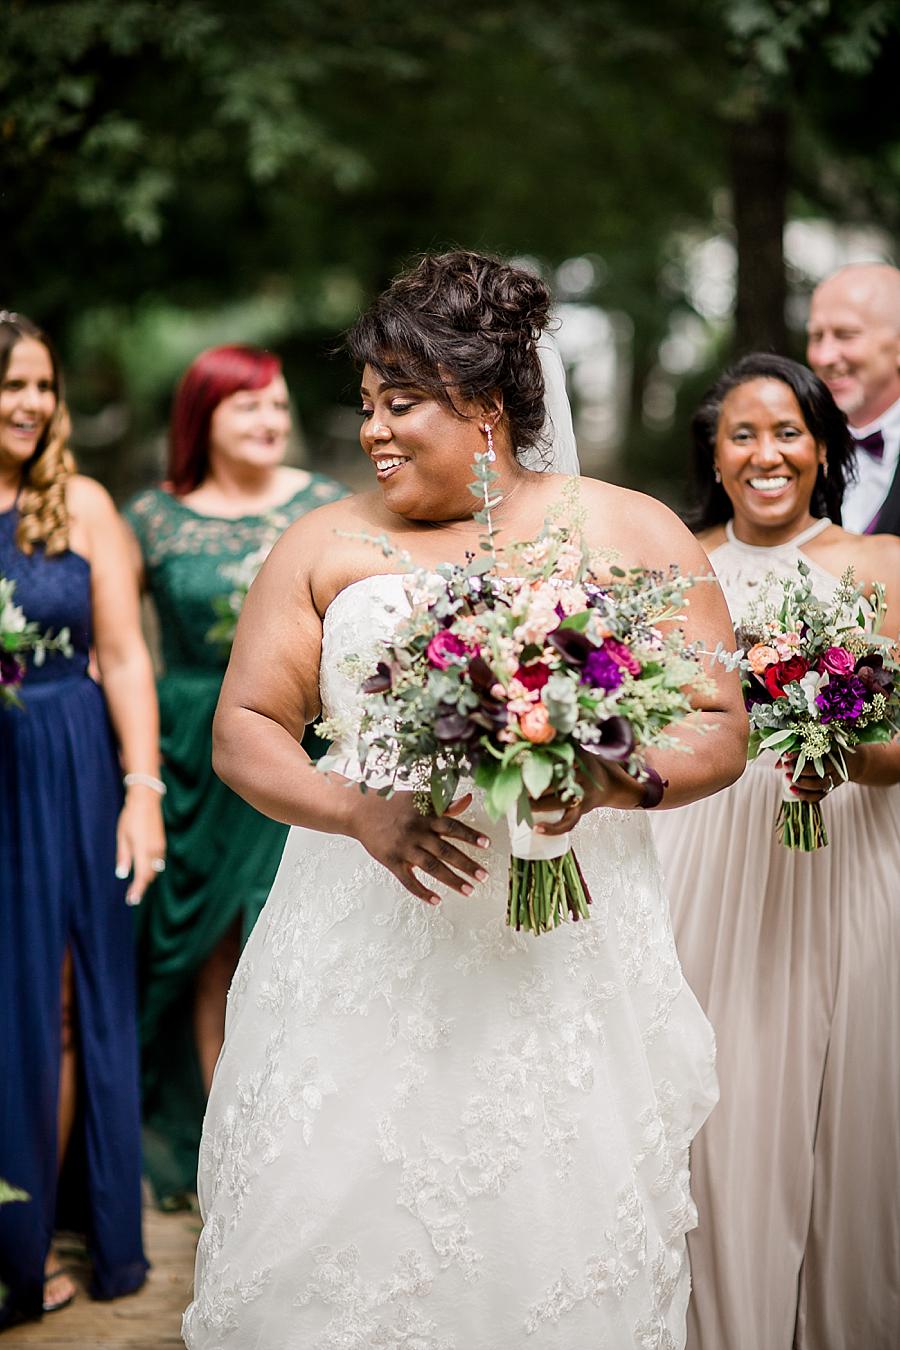 Holding the bouquet at this Wedding at Hunter Valley Farm by Knoxville Wedding Photographer, Amanda May Photos.